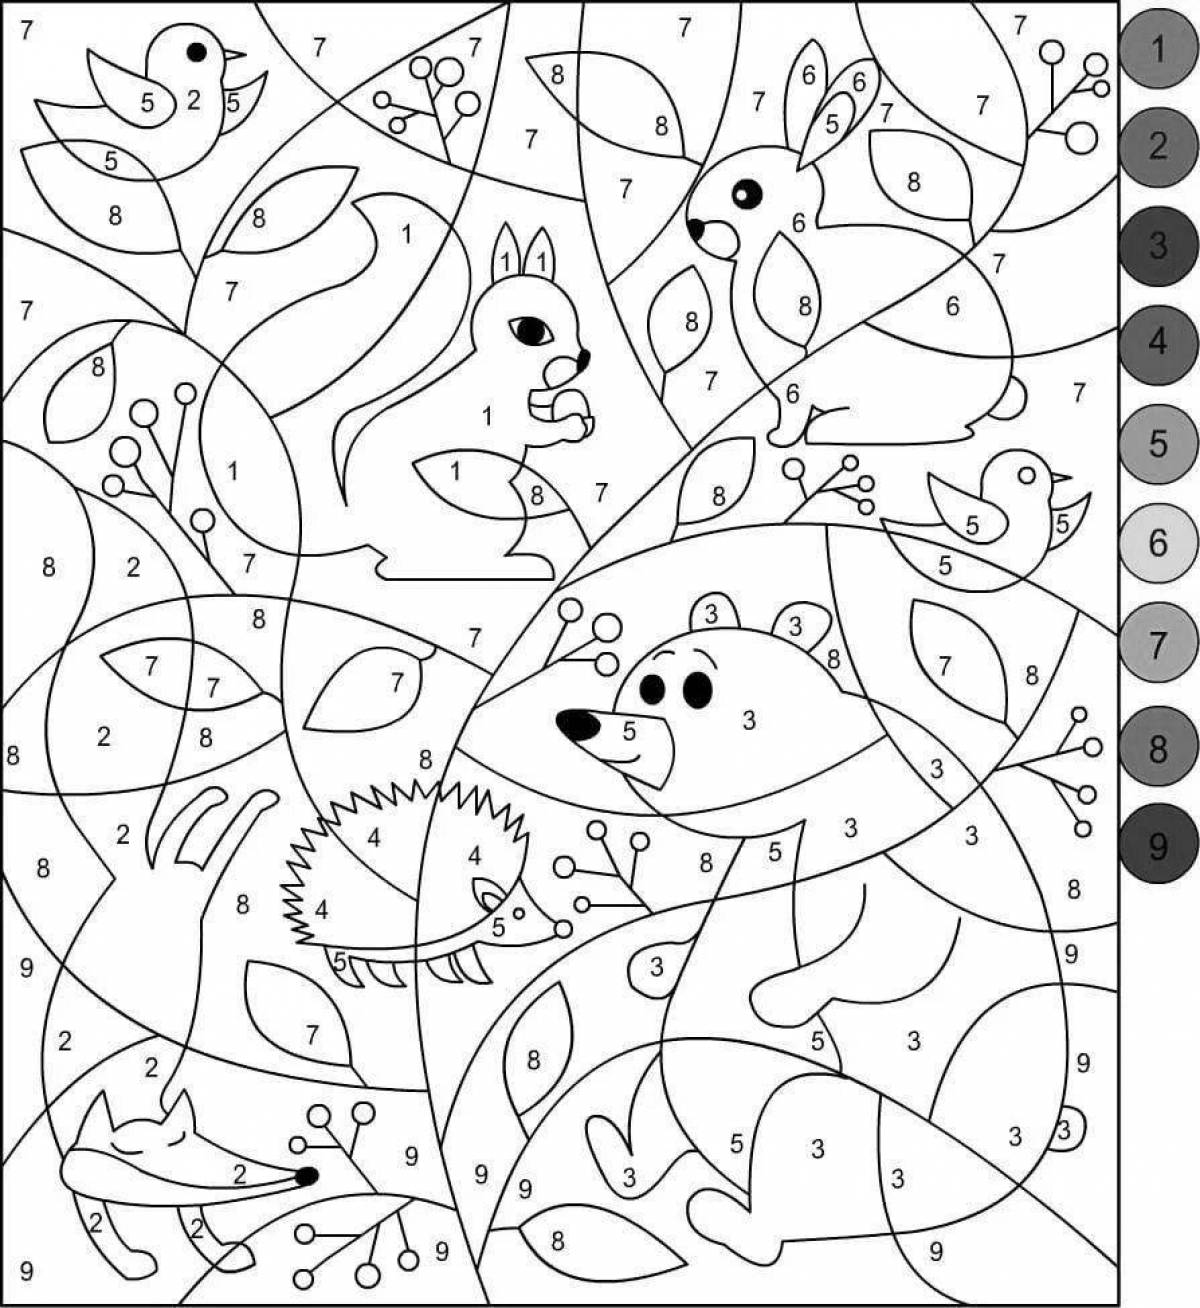 Bright coloring by numbers for children 5 years old